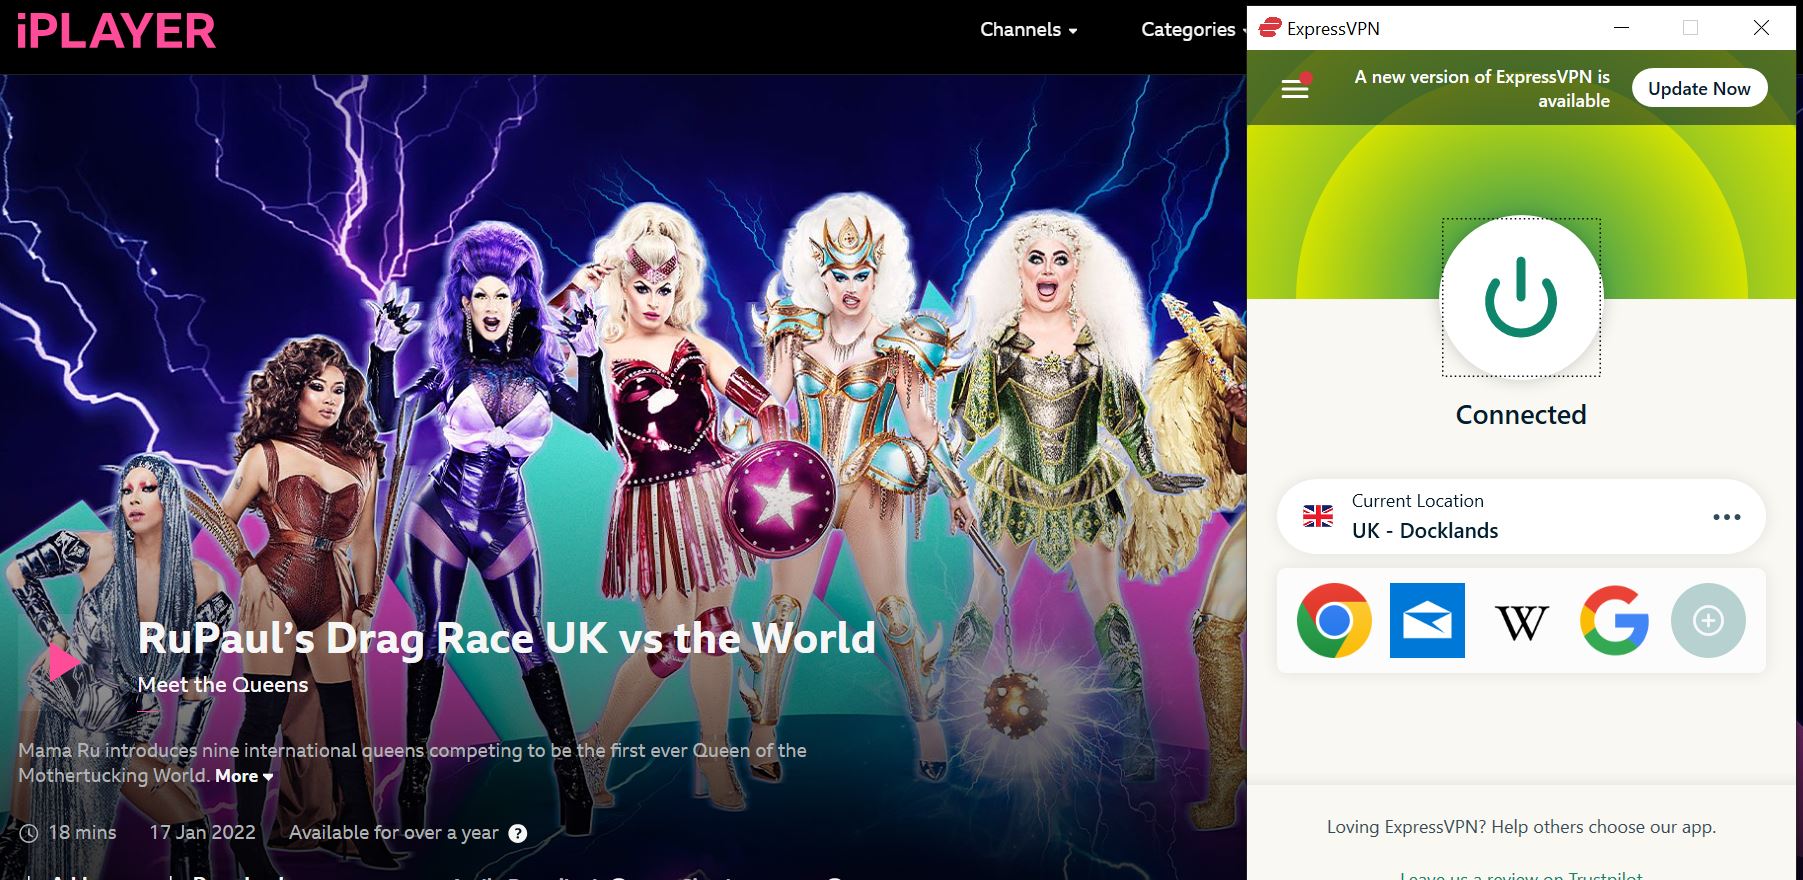 How to watch RuPaul's Drag Race UK vs. the World S2